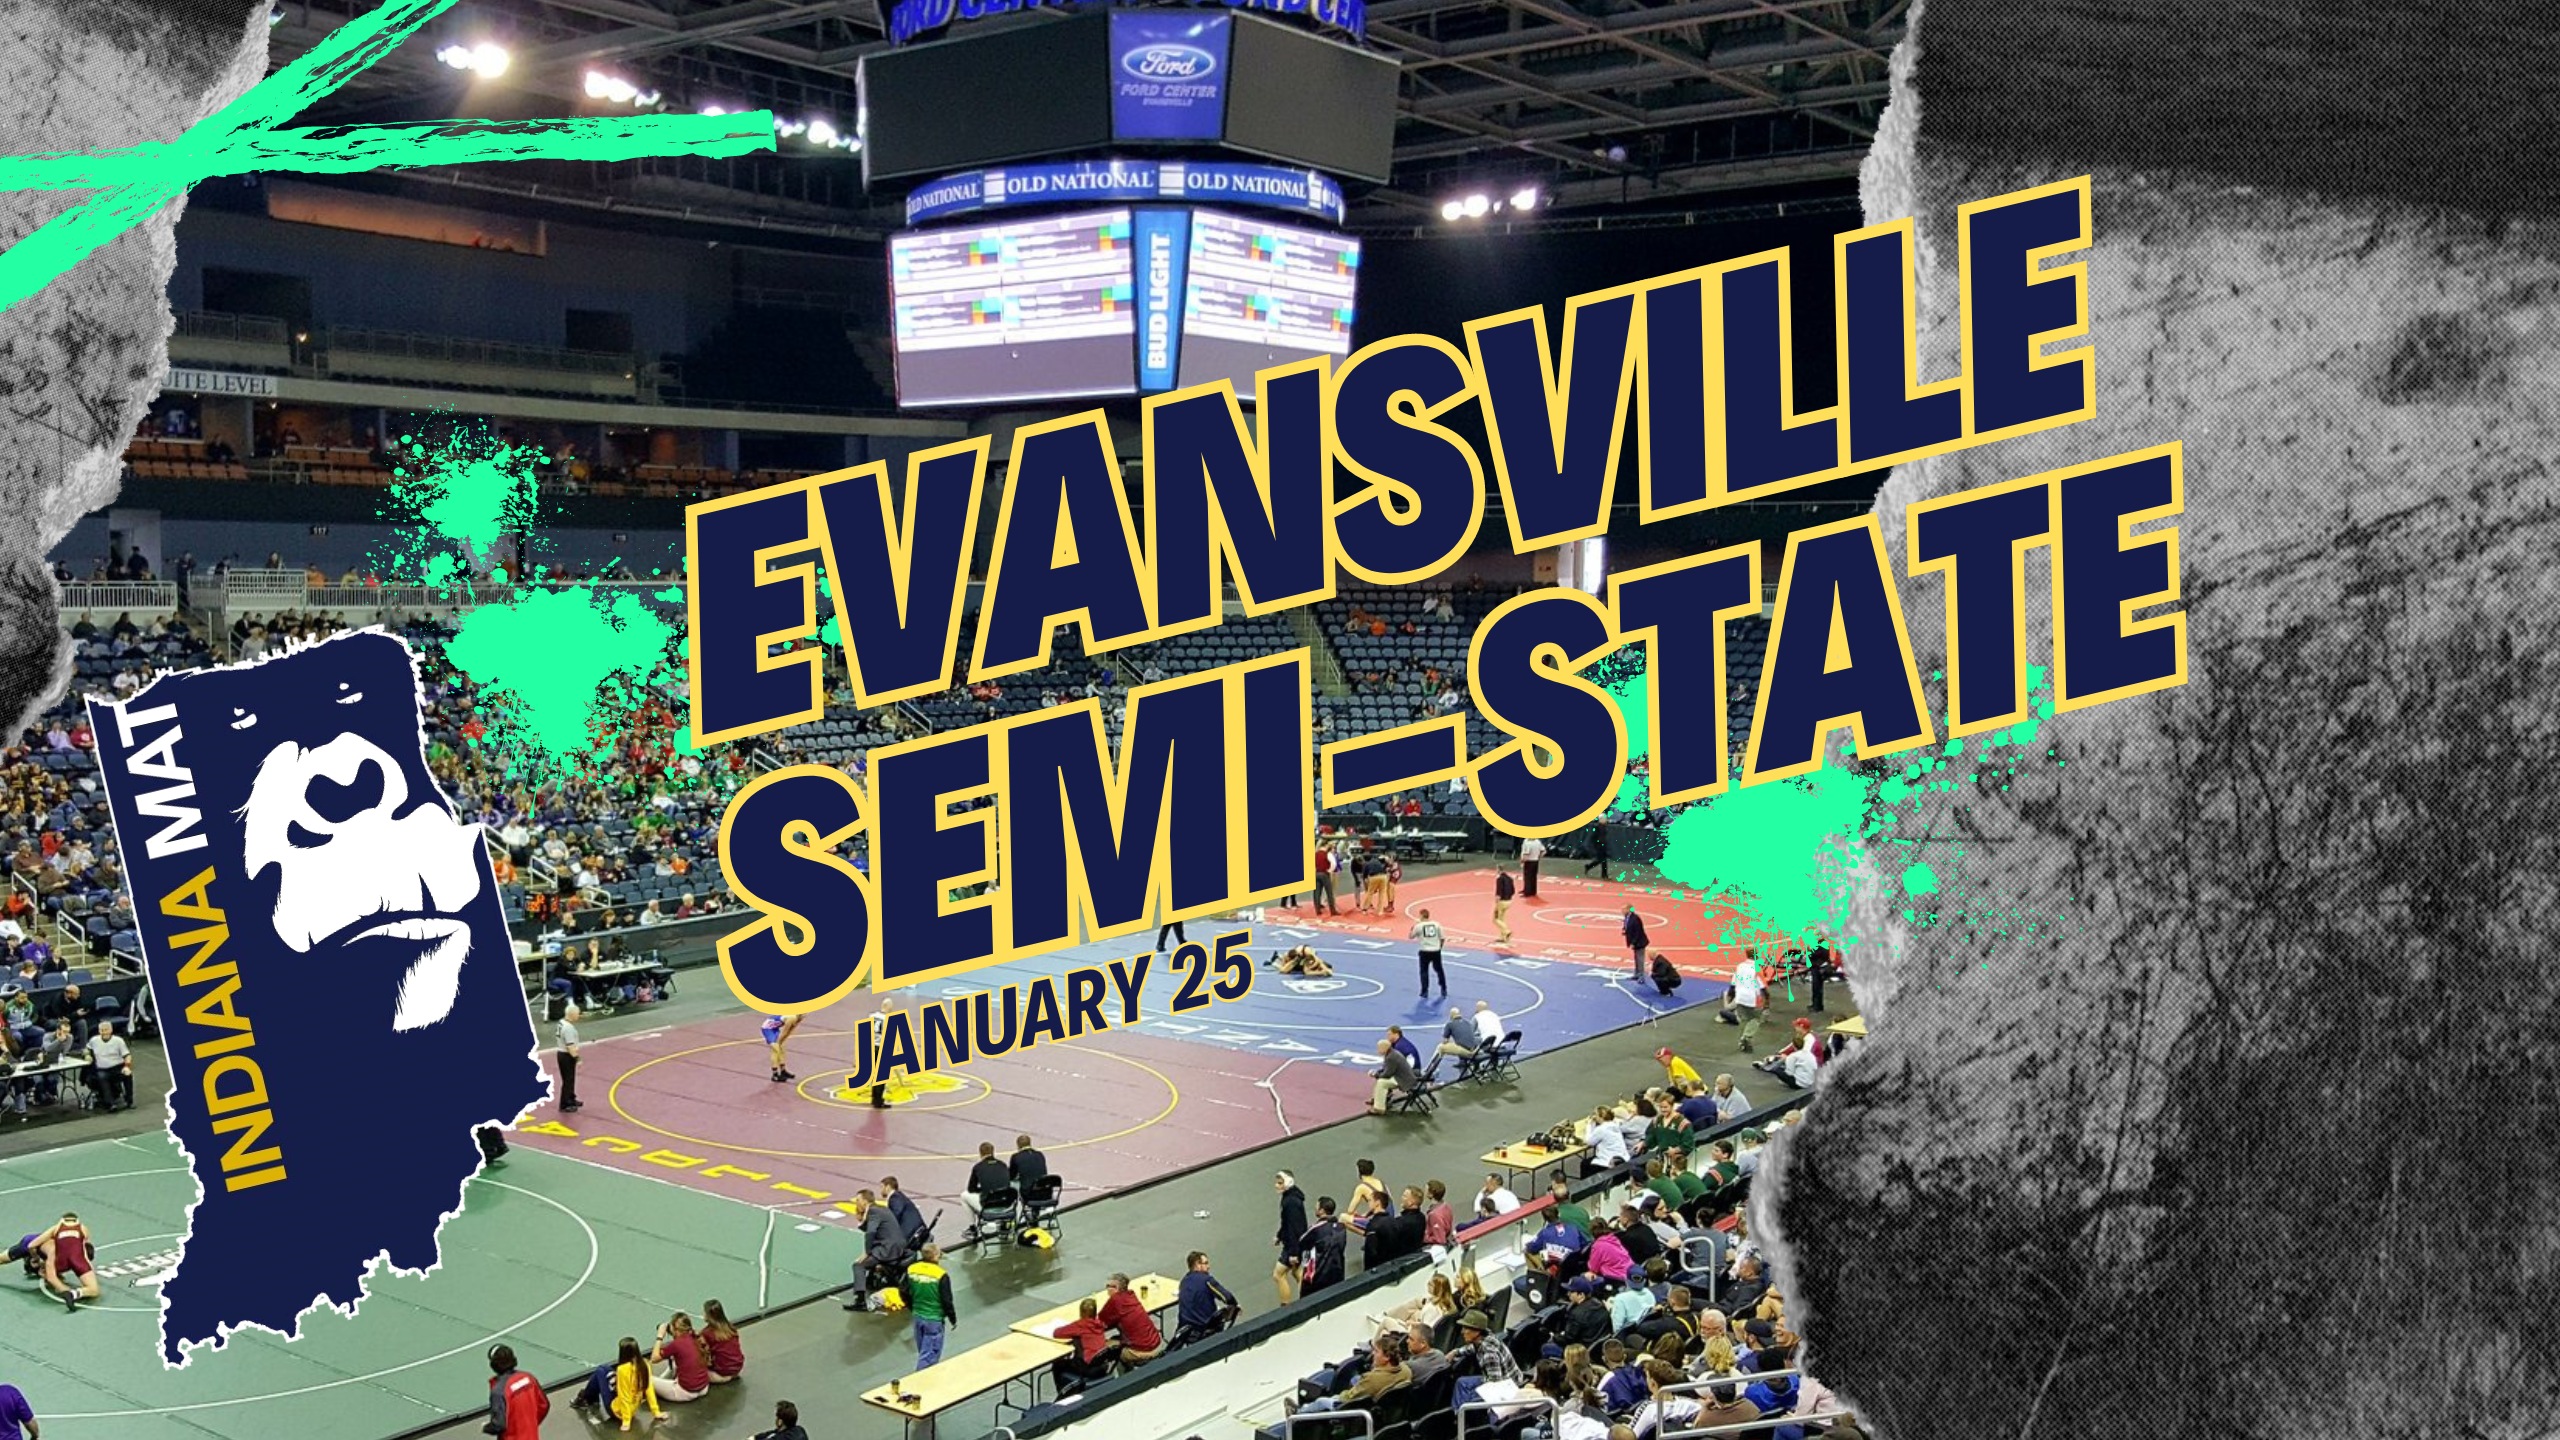 More information about "Evansville Final"